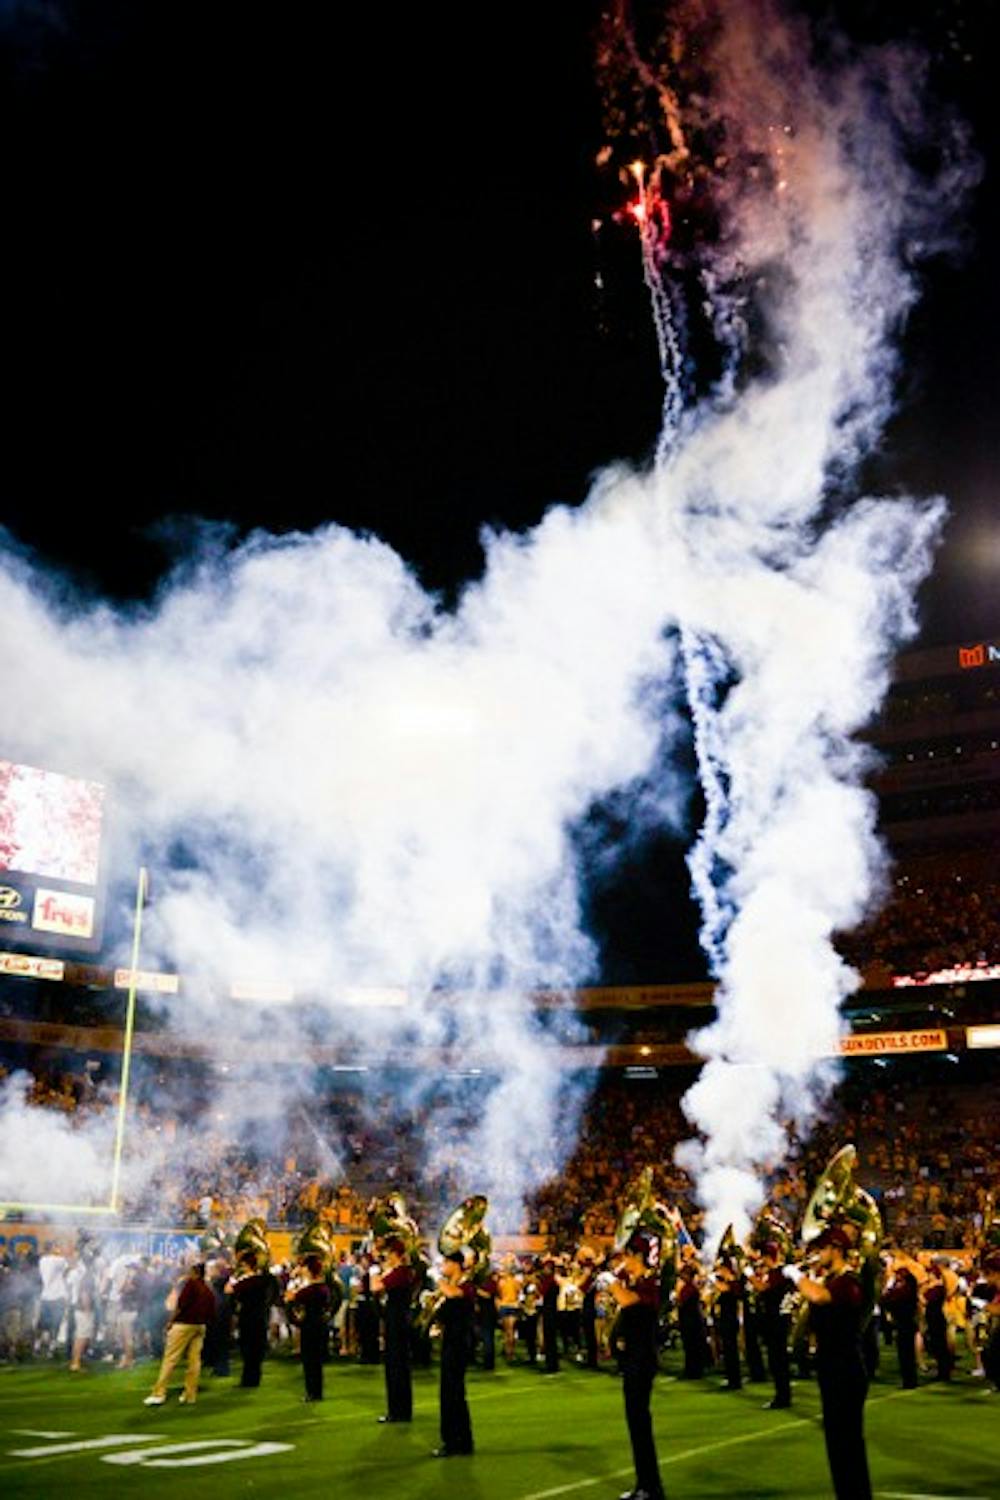 Fireworks explode above the crowd at Sun Devil Stadium before the game against Weber St on Aug. 28. Firework restrictions will remain in place during the game against UCLA on Sept. 24. (Photo by Andrew Ybanez)